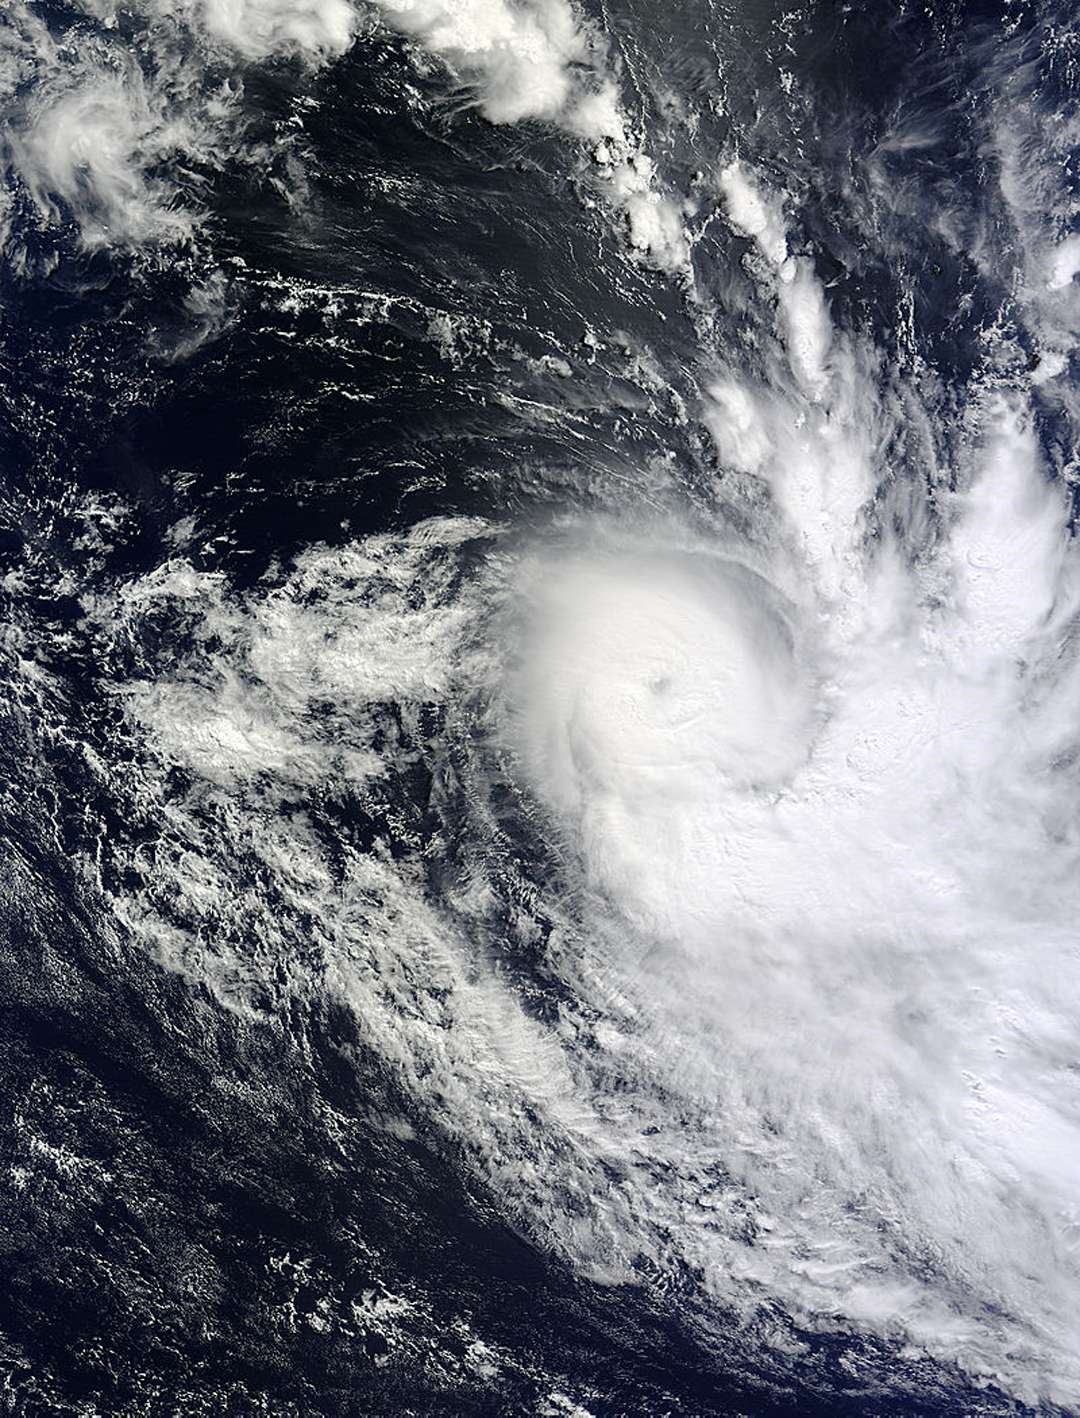 On April 7 at 04:25 UTC (12:25 a.m. EDT), NASA captured this visible-light image of Tropical Cyclone Ikola in the Indian Ocean.